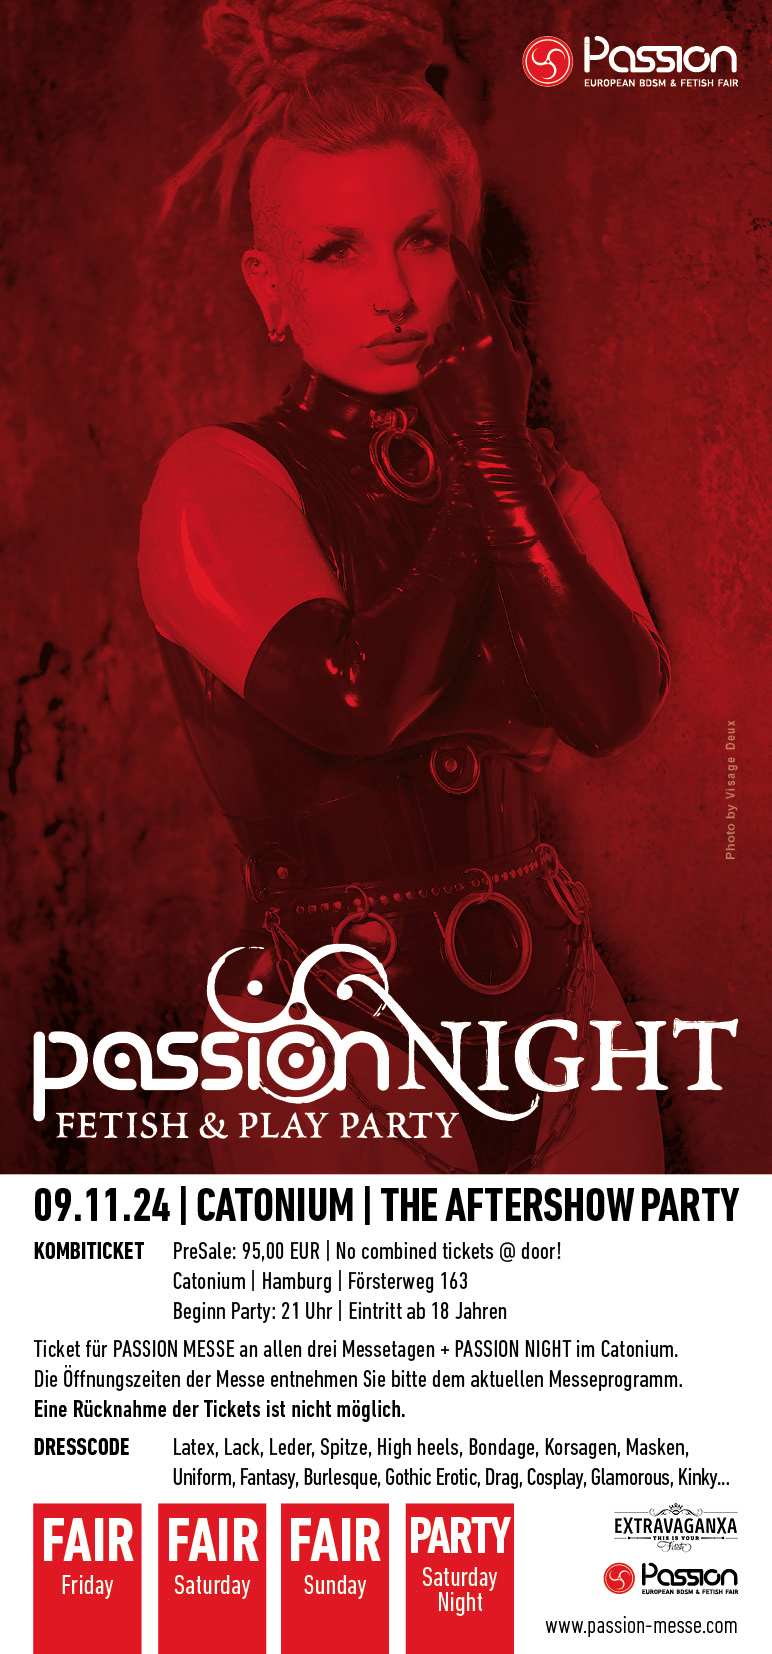 Passion Messe - Kombiticket 3-Tages-Messeticket + Passion Night